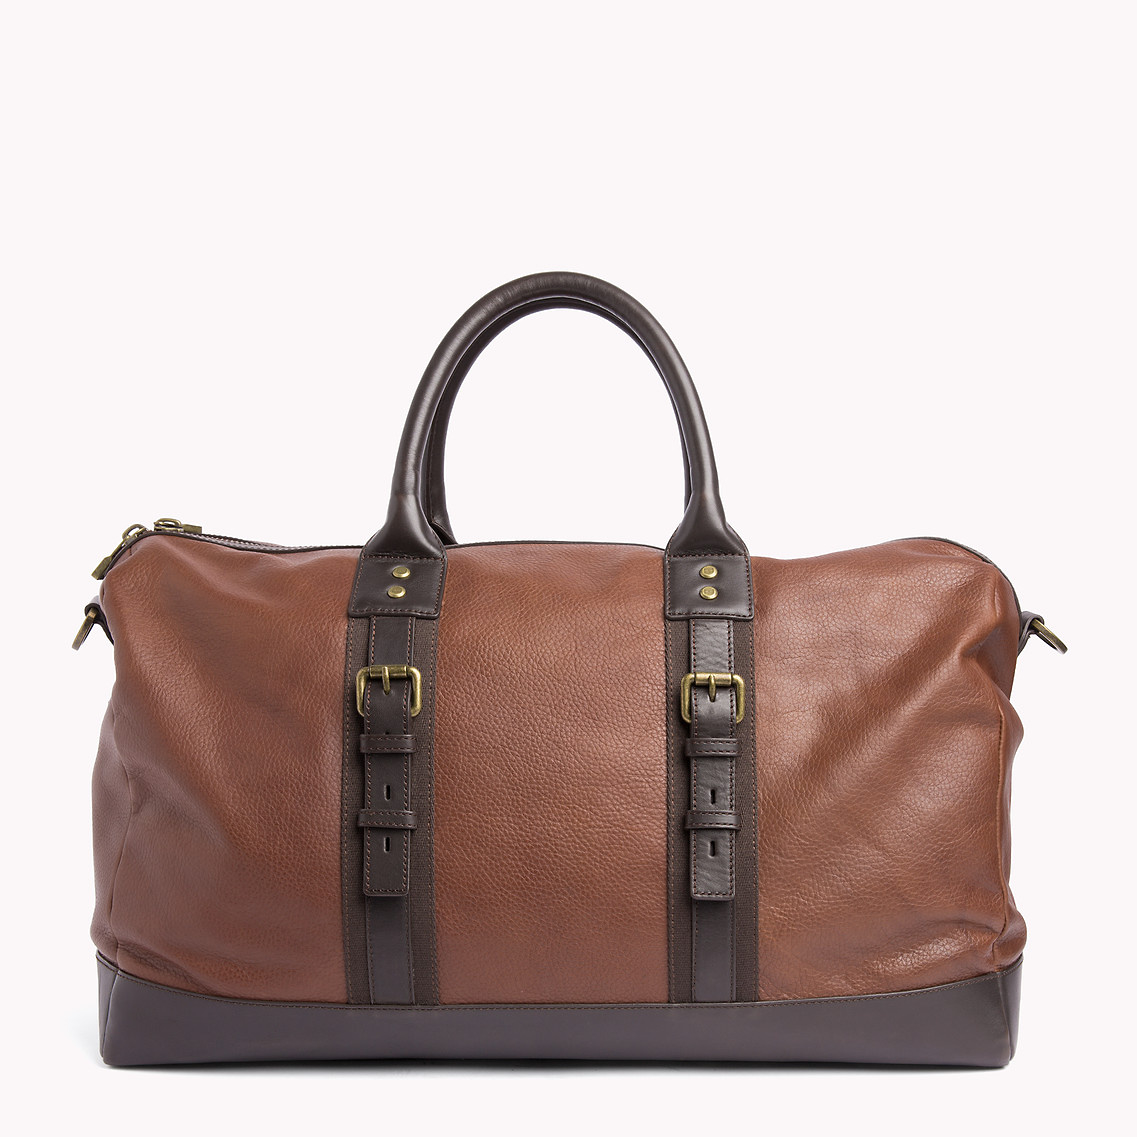 Tommy Hilfiger Tiago Duffle Bag in Brown for Men - Lyst